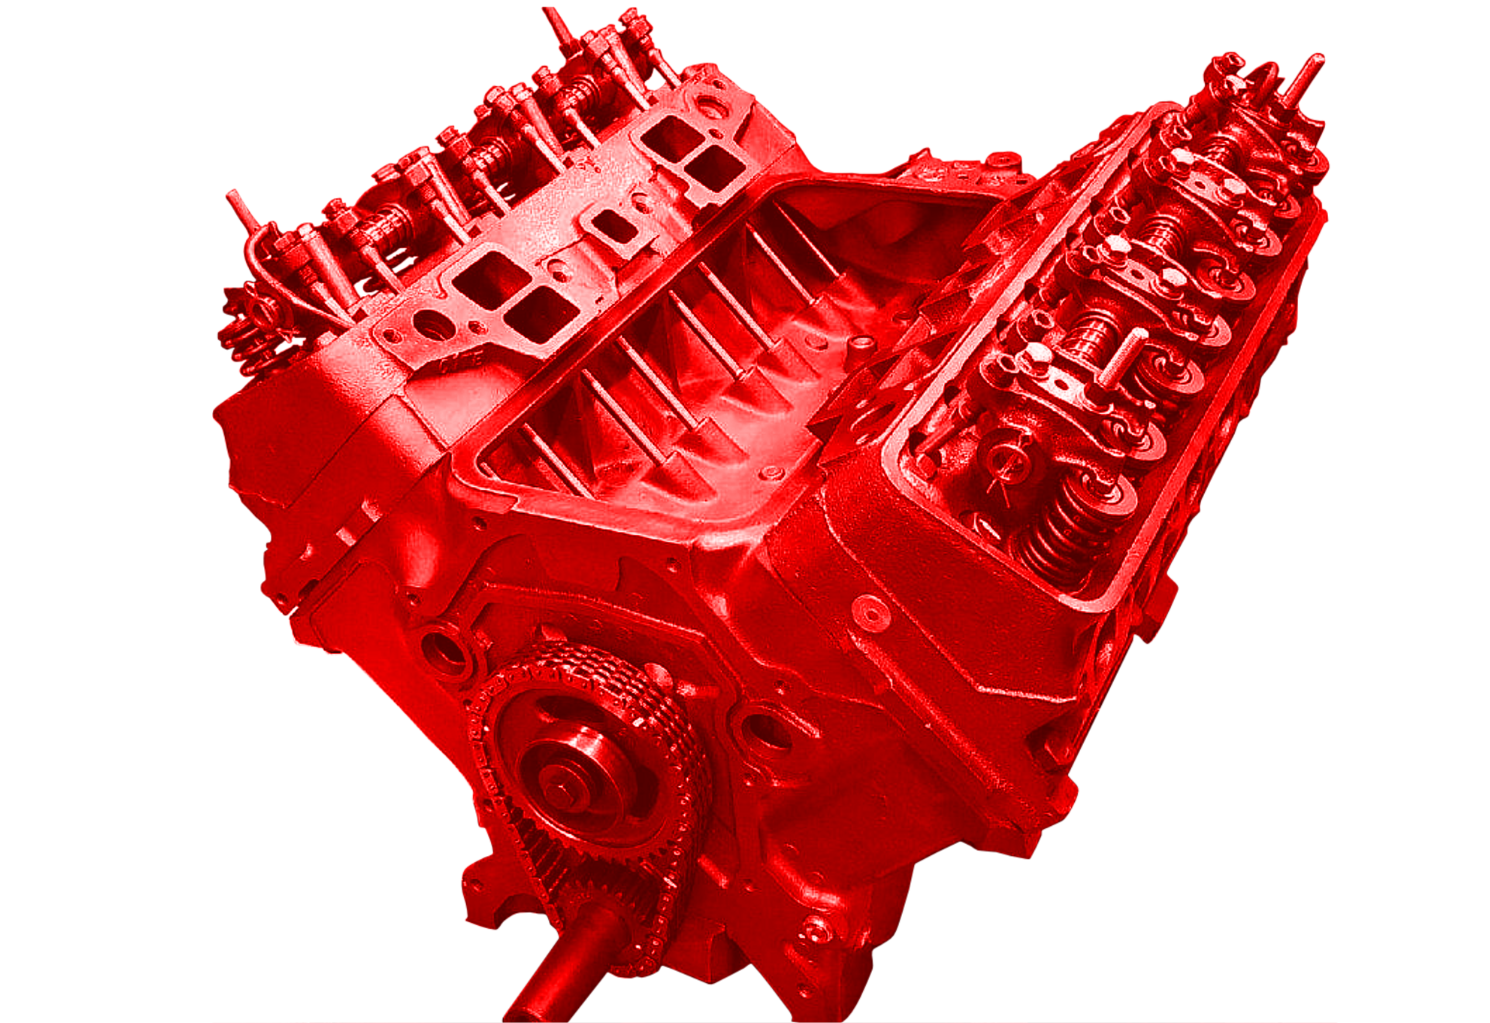 S&J-Ford-292-ci-4.8L-remanufactured-long-block-engine